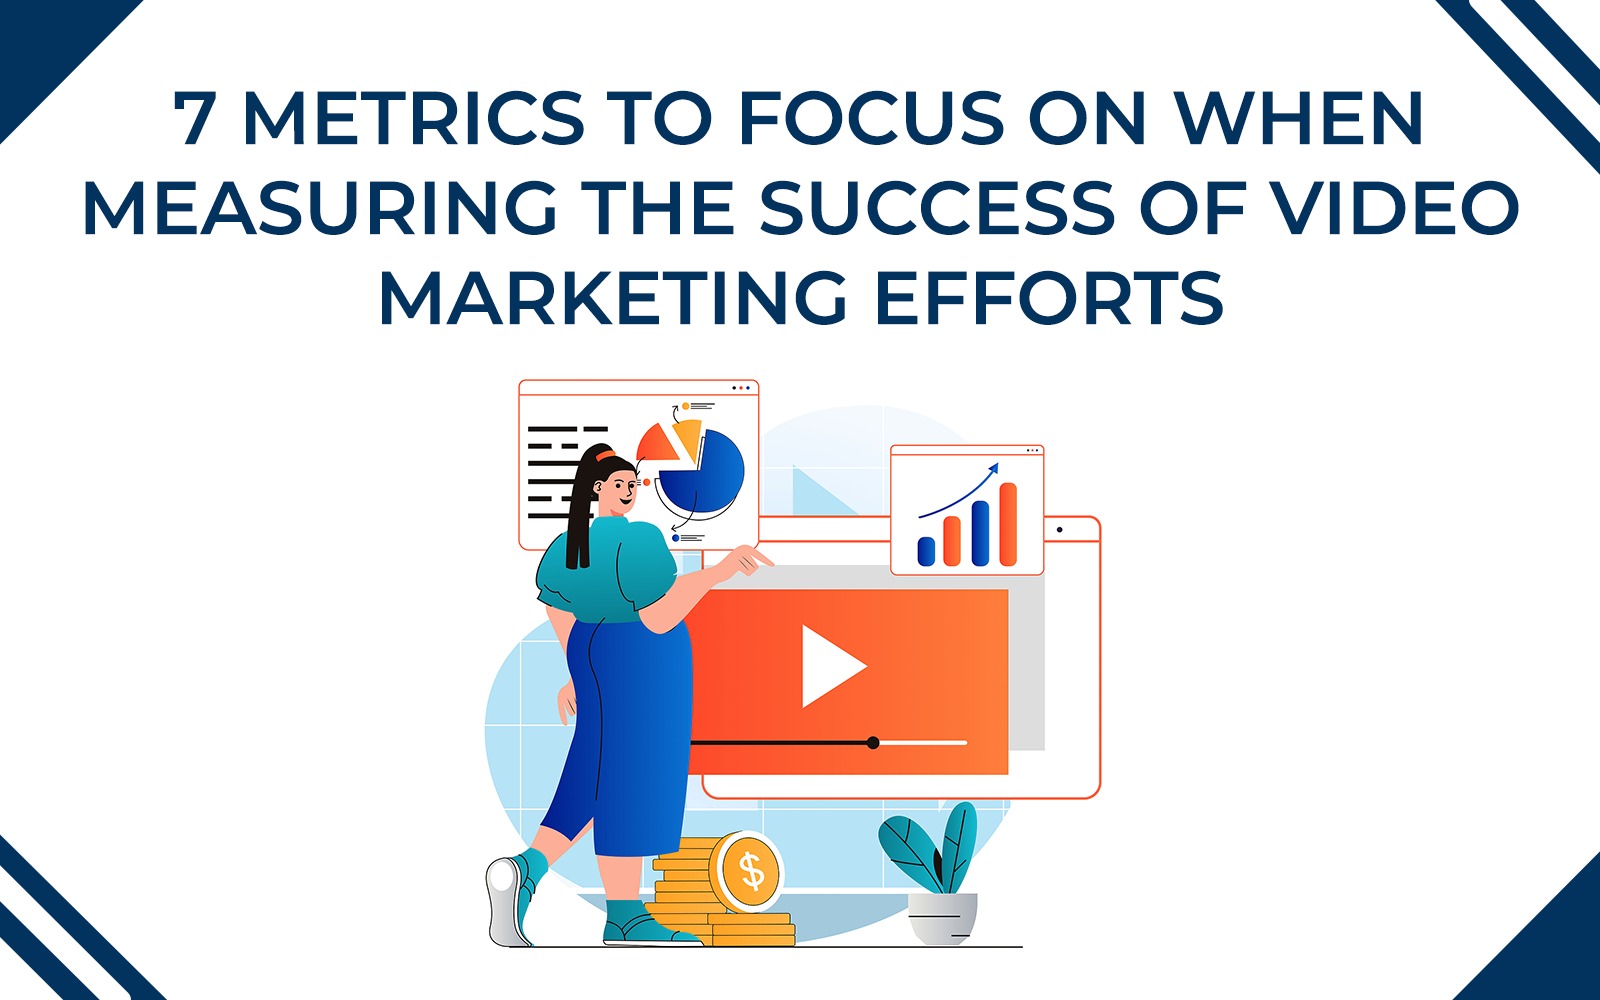 7 Metrics to Focus on When Measuring Success of Video Marketing Efforts